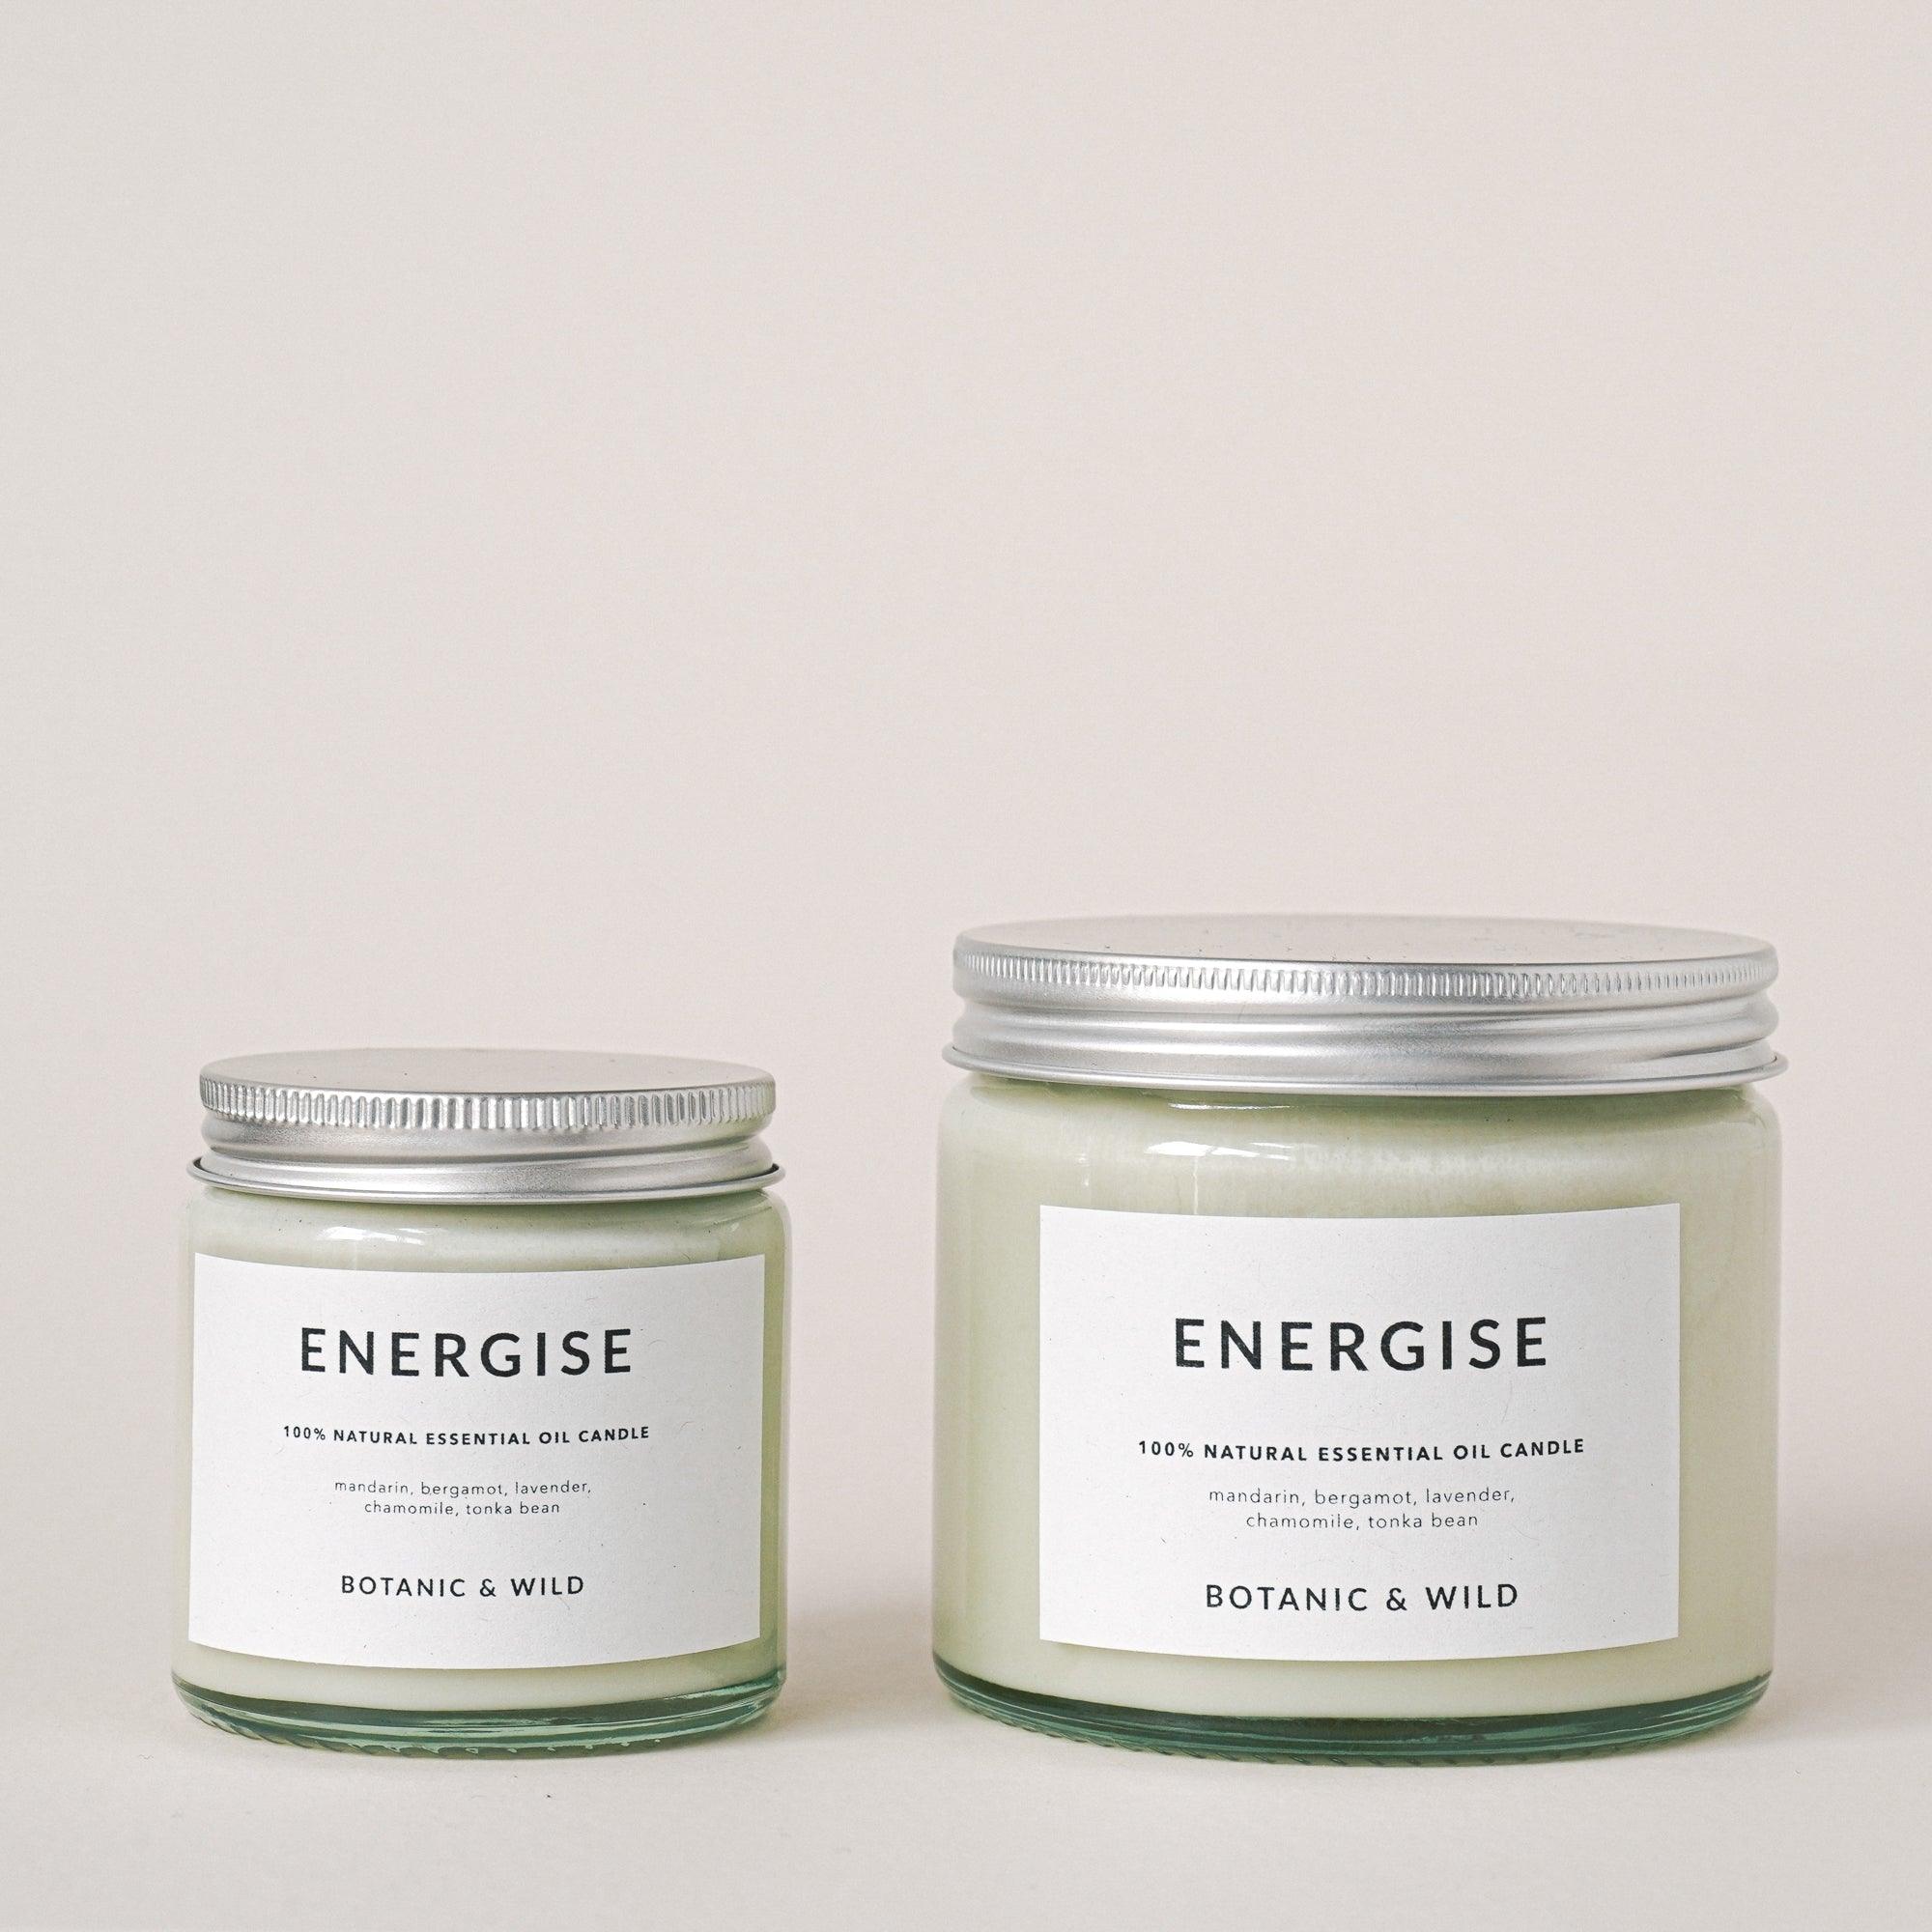 ENERGISE Essential Oil Soy Candles - Botanic & Wild